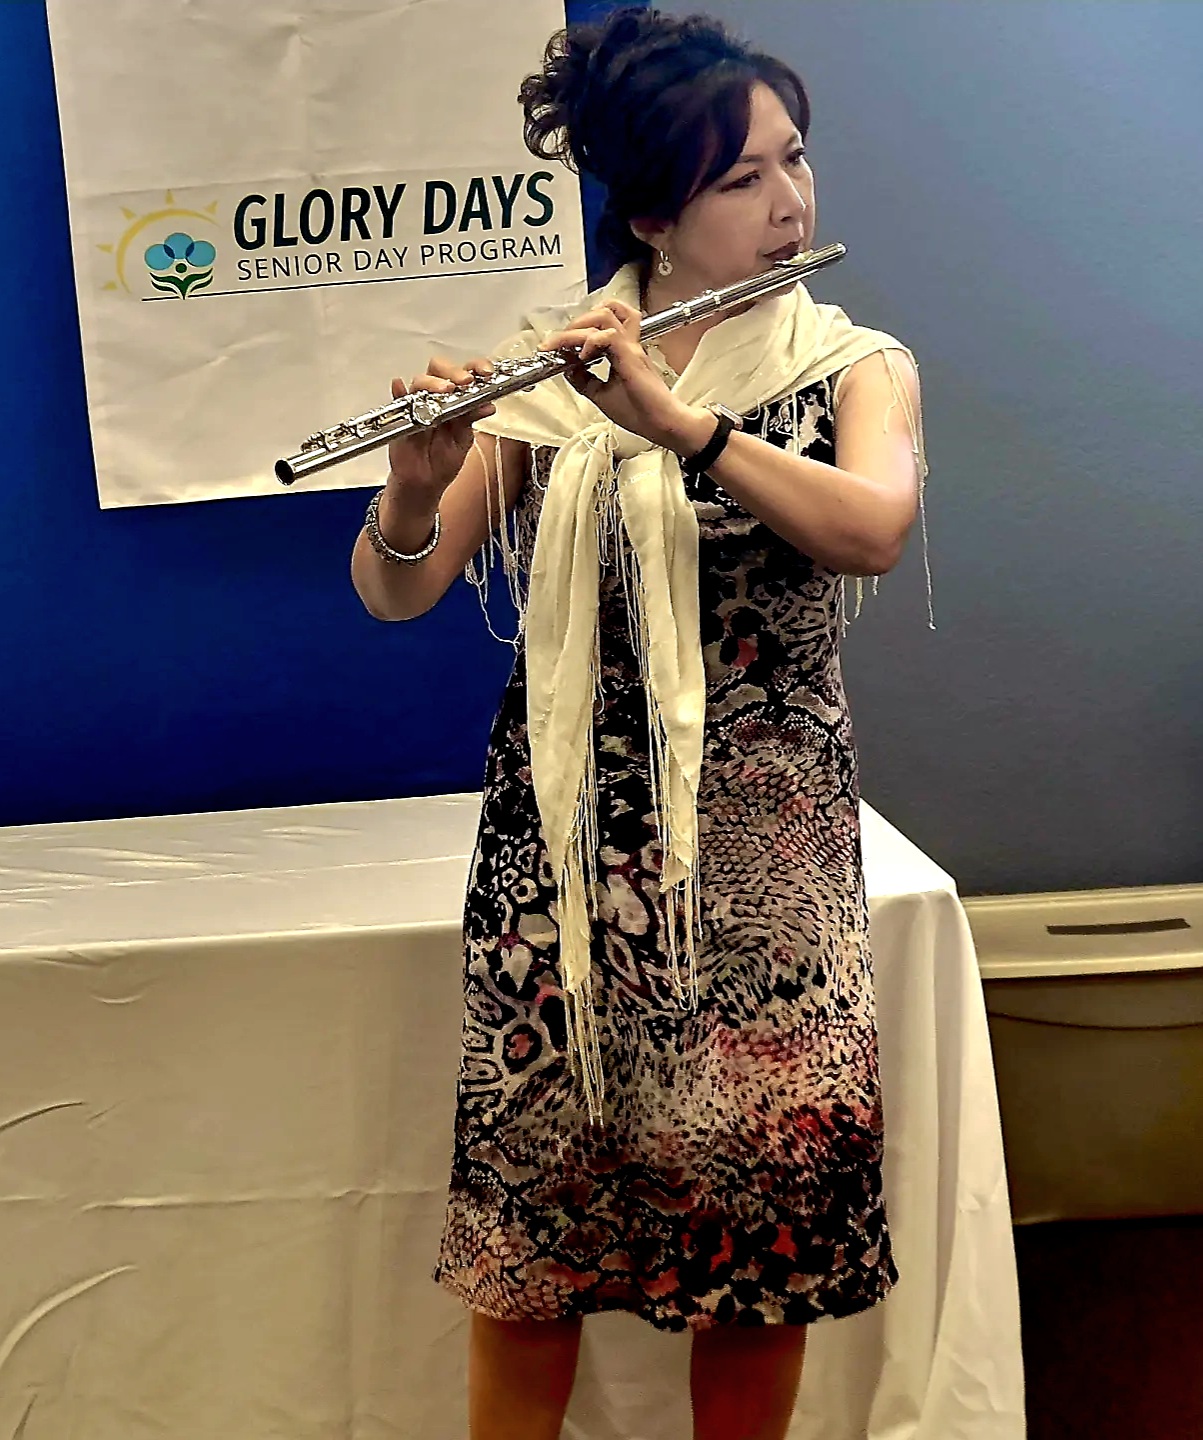 A young lady playing flute on the stage